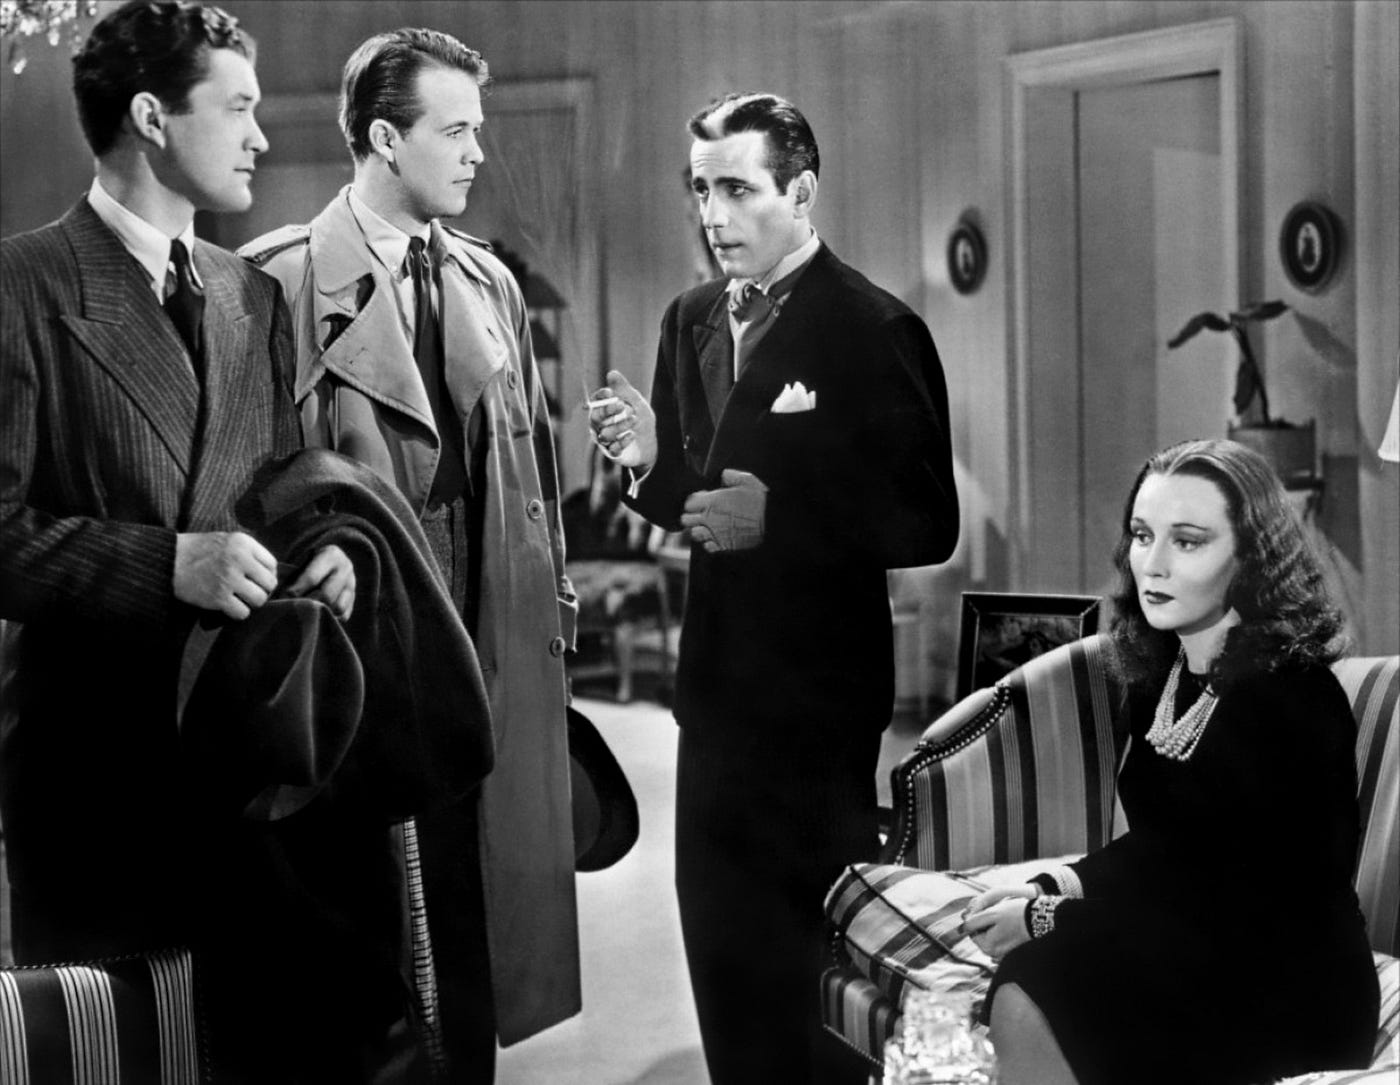 Principal characters in early Humphrey Bogart 1939 film The Return of Doctor X